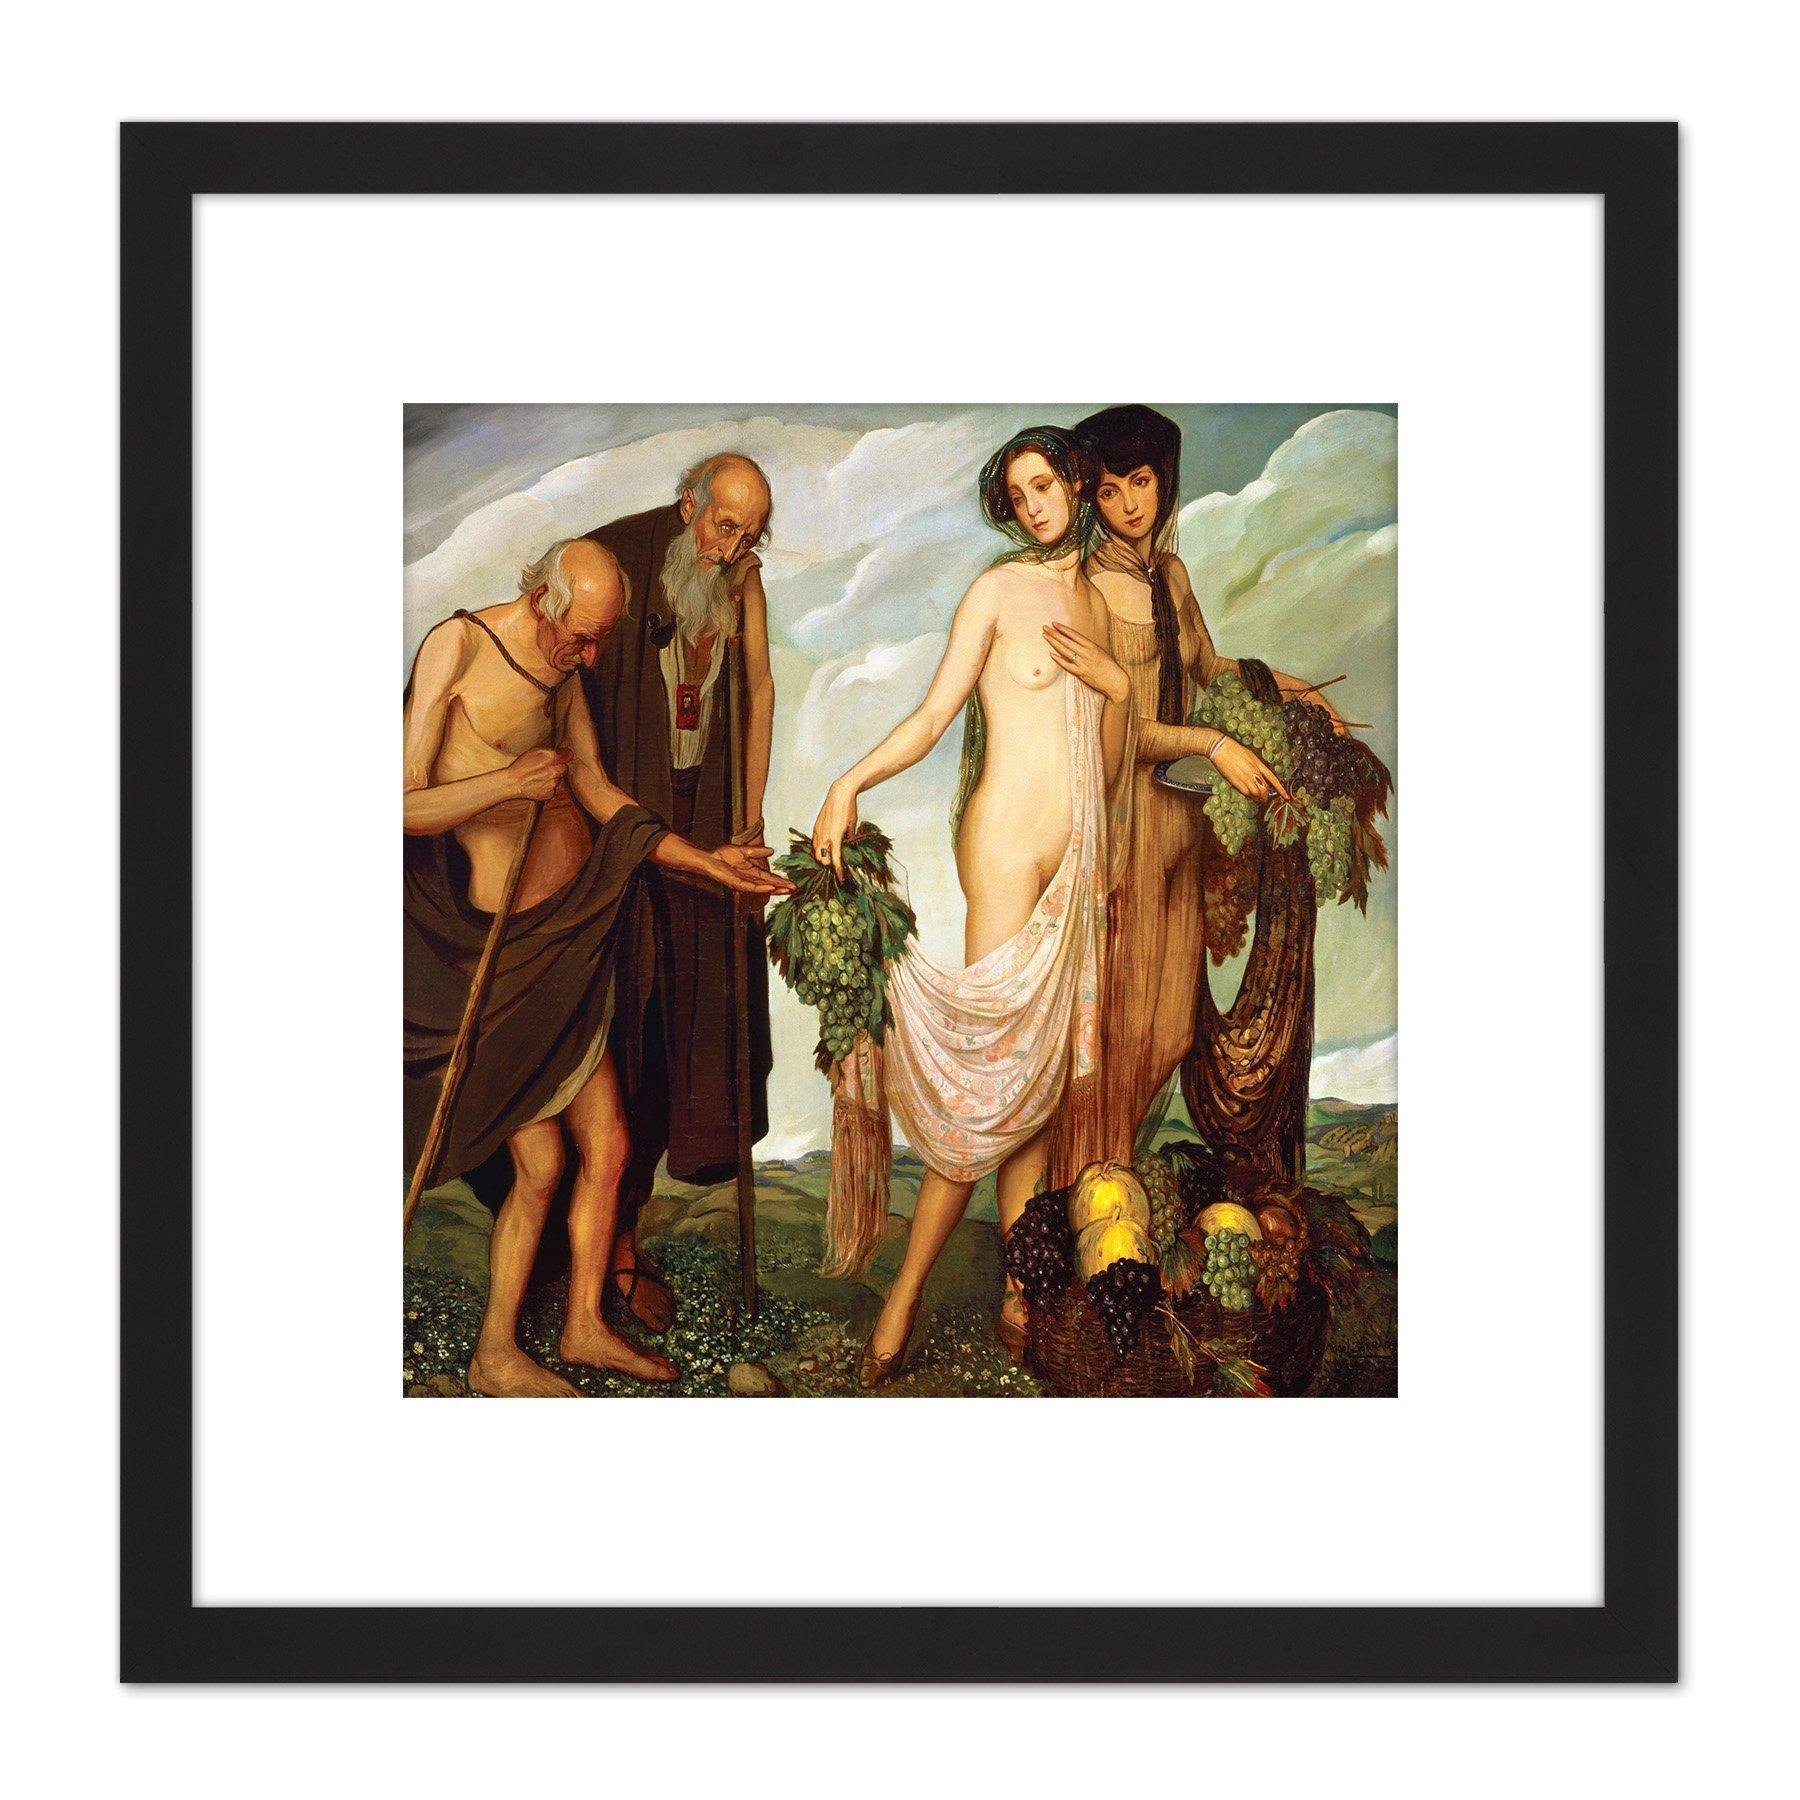 Angel Zarraga The Gift 8X8 Inch Square Wooden Framed Wall Art Print Picture with Mount - image 1